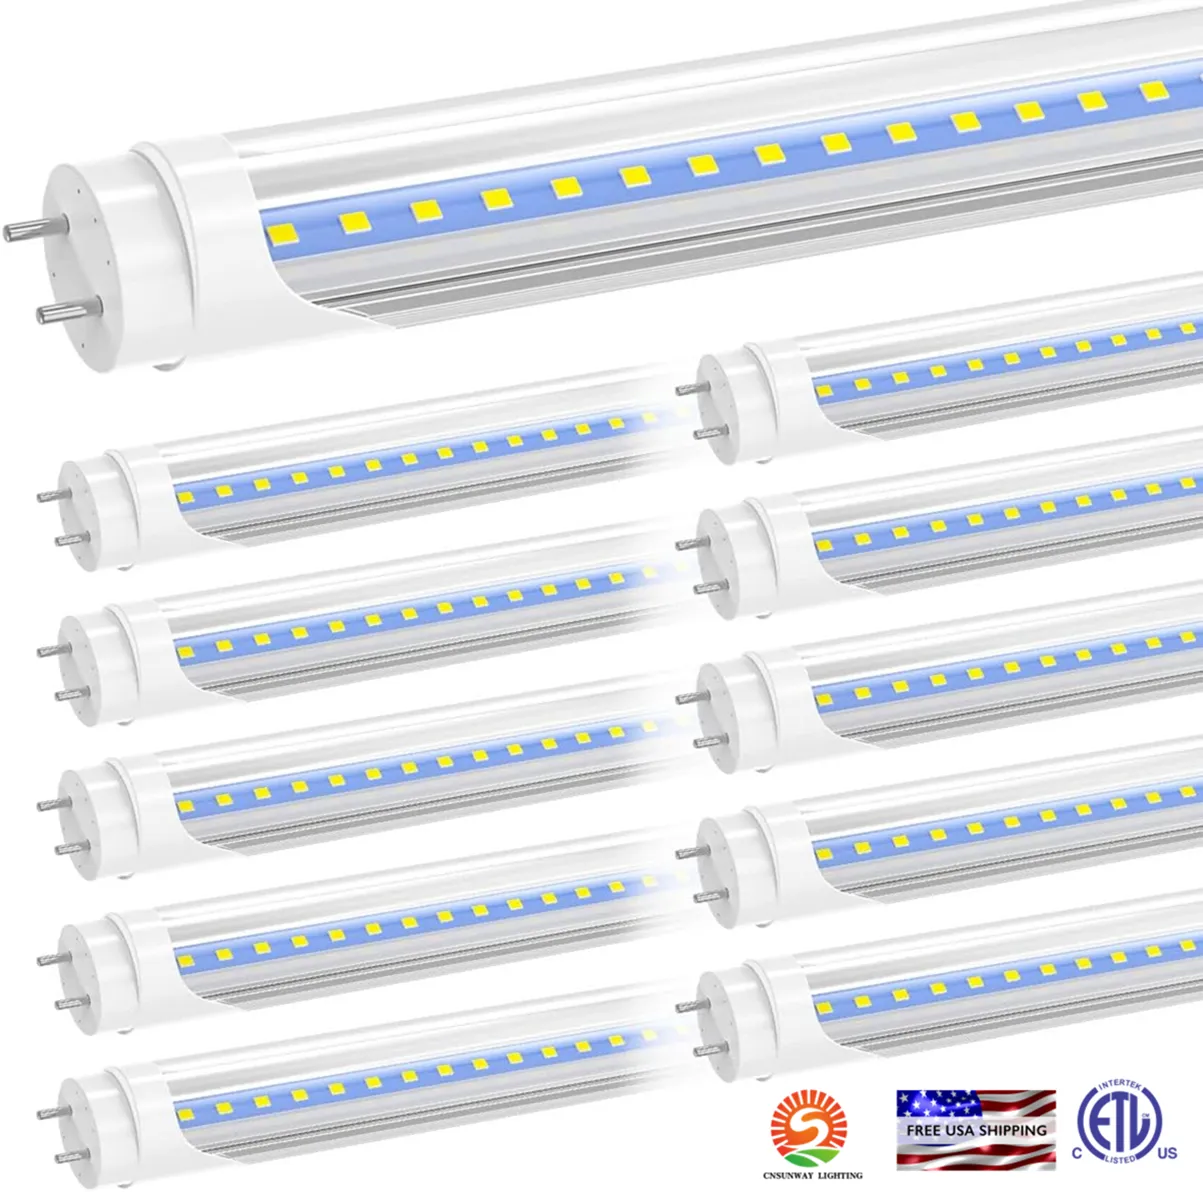 4FT T8 LED Bulbs 4 Foot, Hybrid Type A+B Light Tube, 18W 2400LM 6000K, Plug & Play, Ballast Bypass, Single Double-Ended, T8 T10 T12 Fluorescent Light Bulbs Replacement, ETL